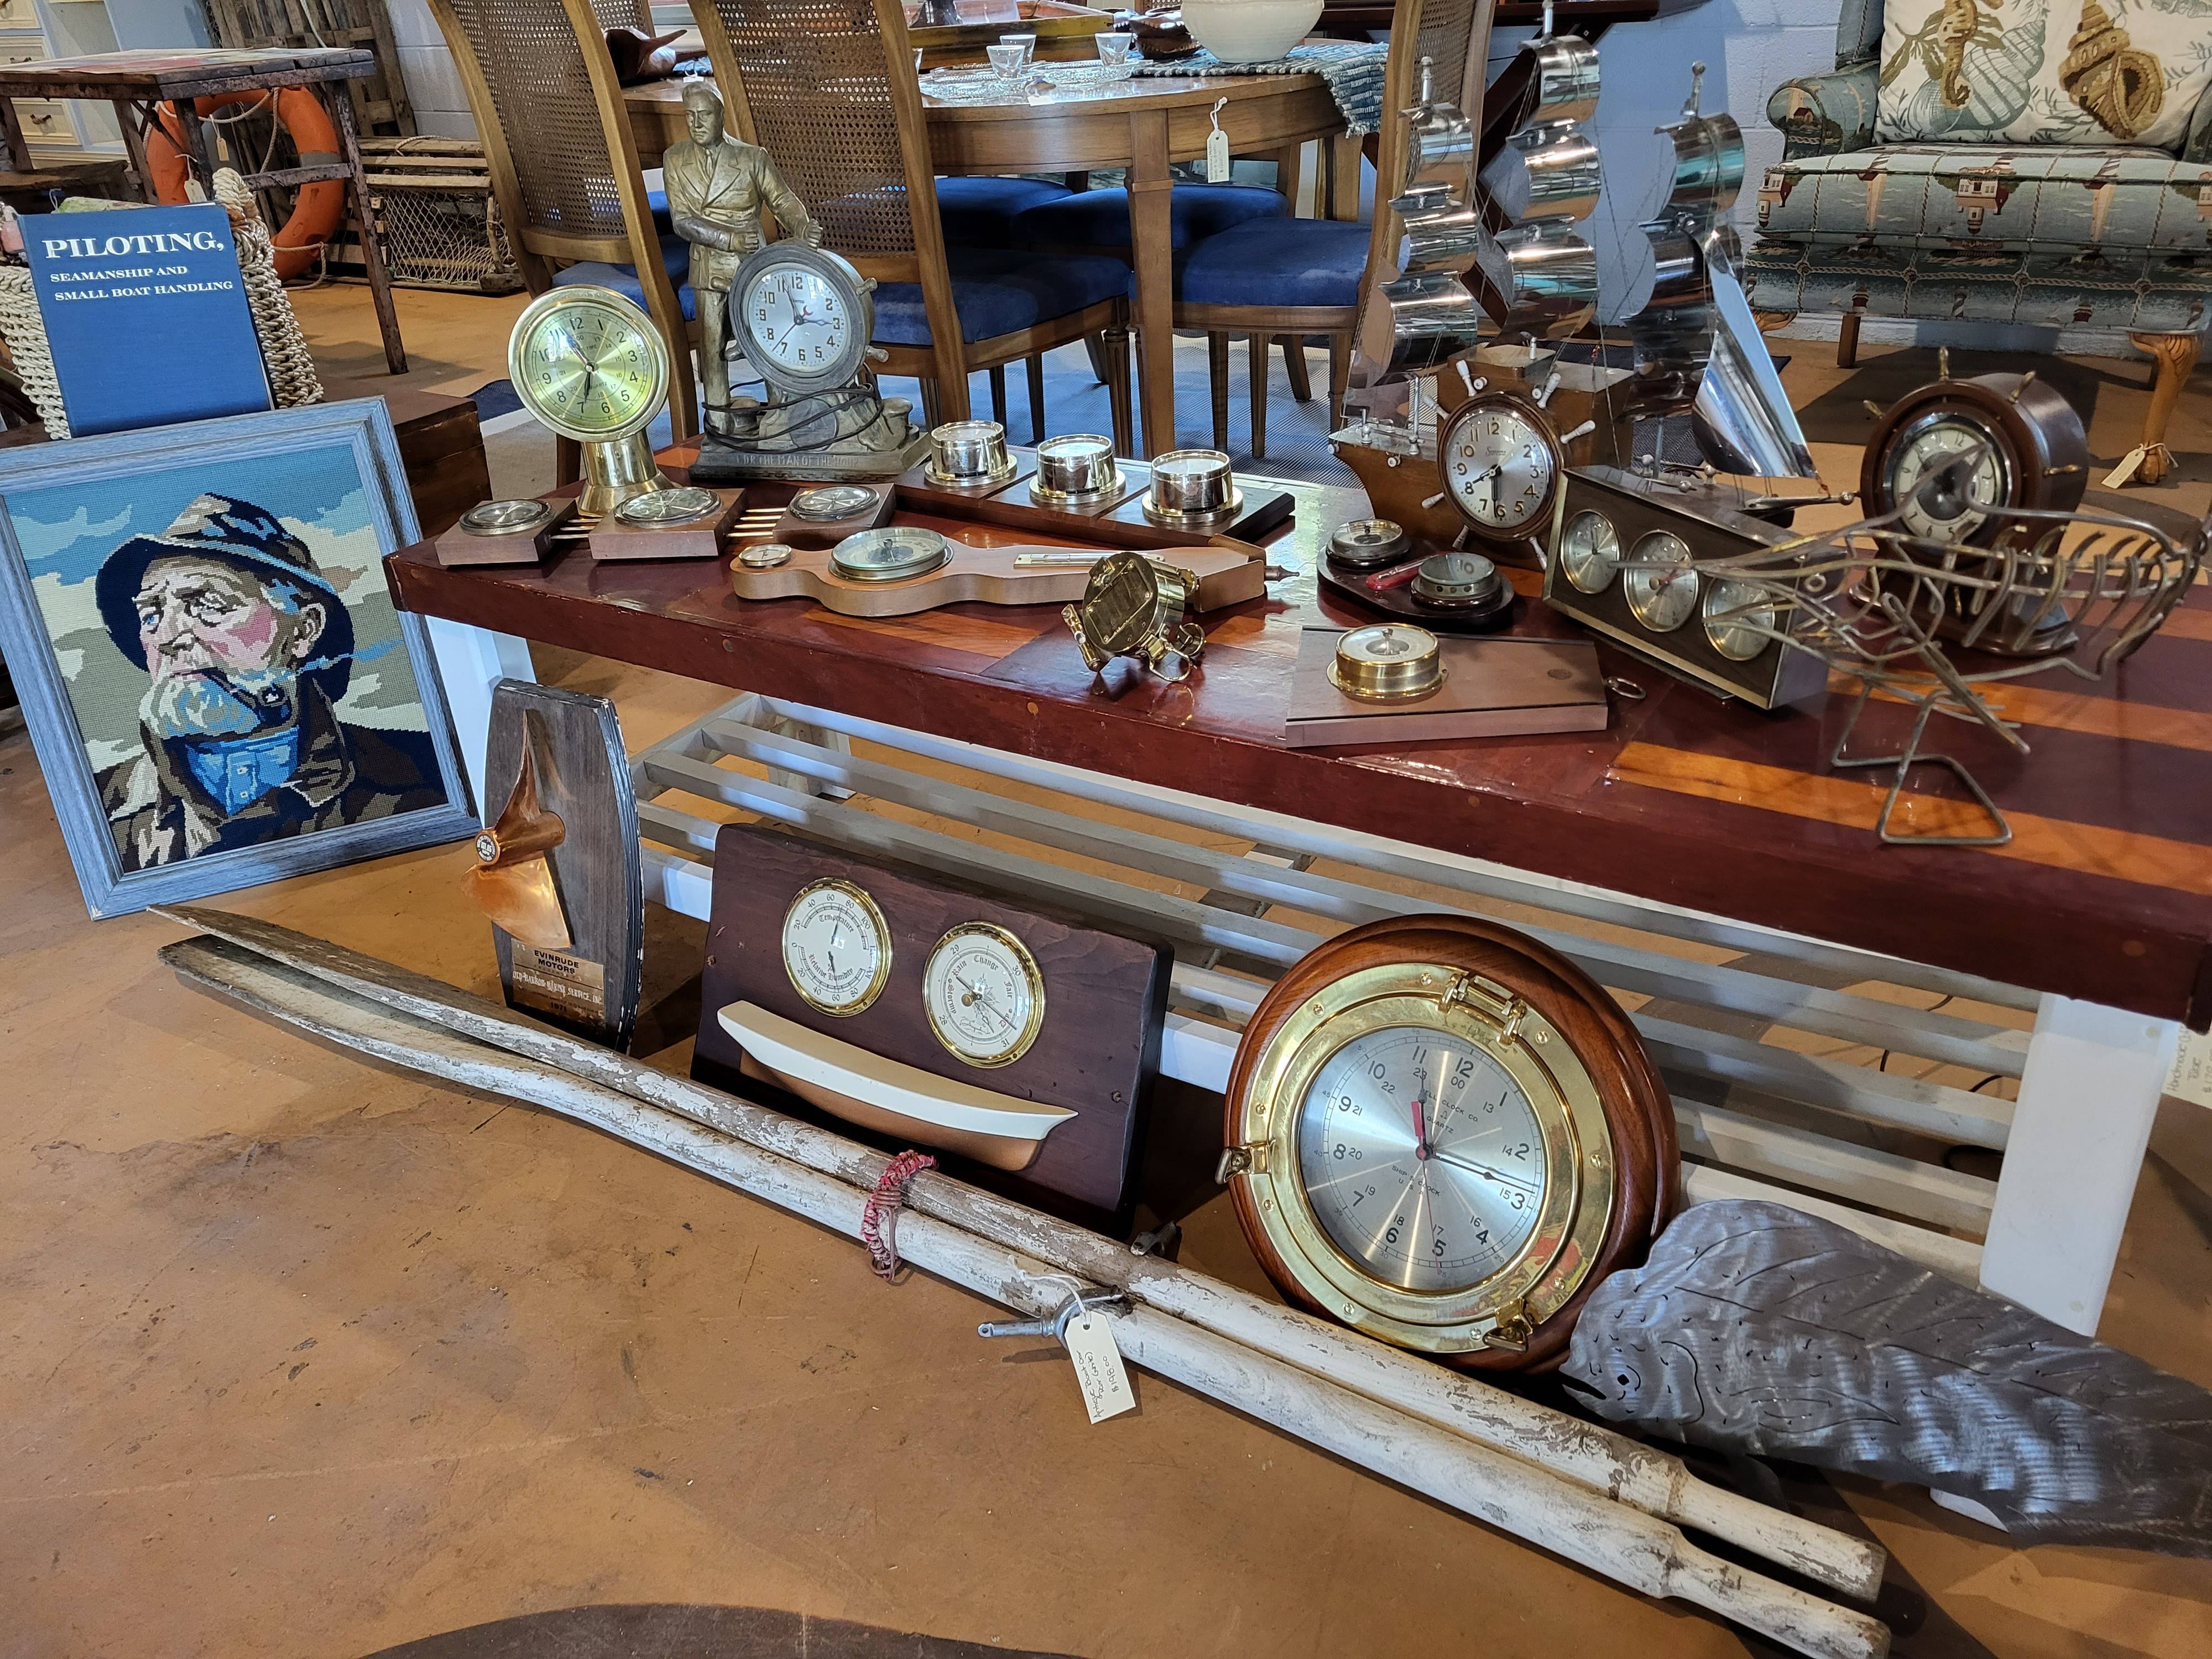  Angler's Attic: Your Source for Nautical Antiques